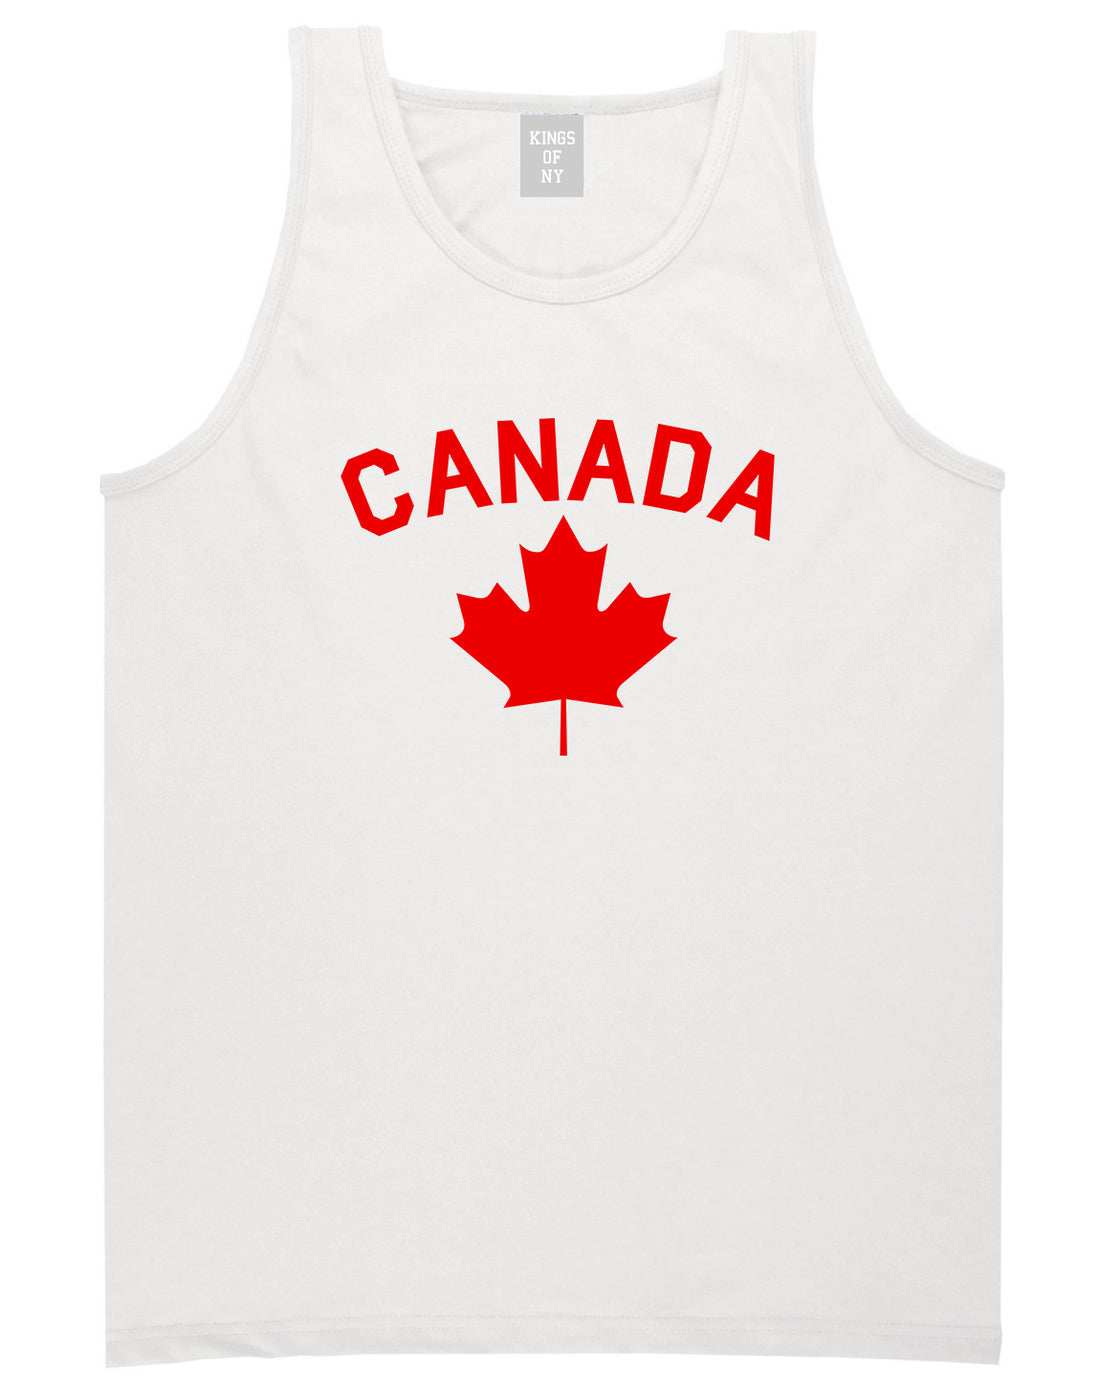 Canada Maple Leaf Red Mens Tank Top Shirt White